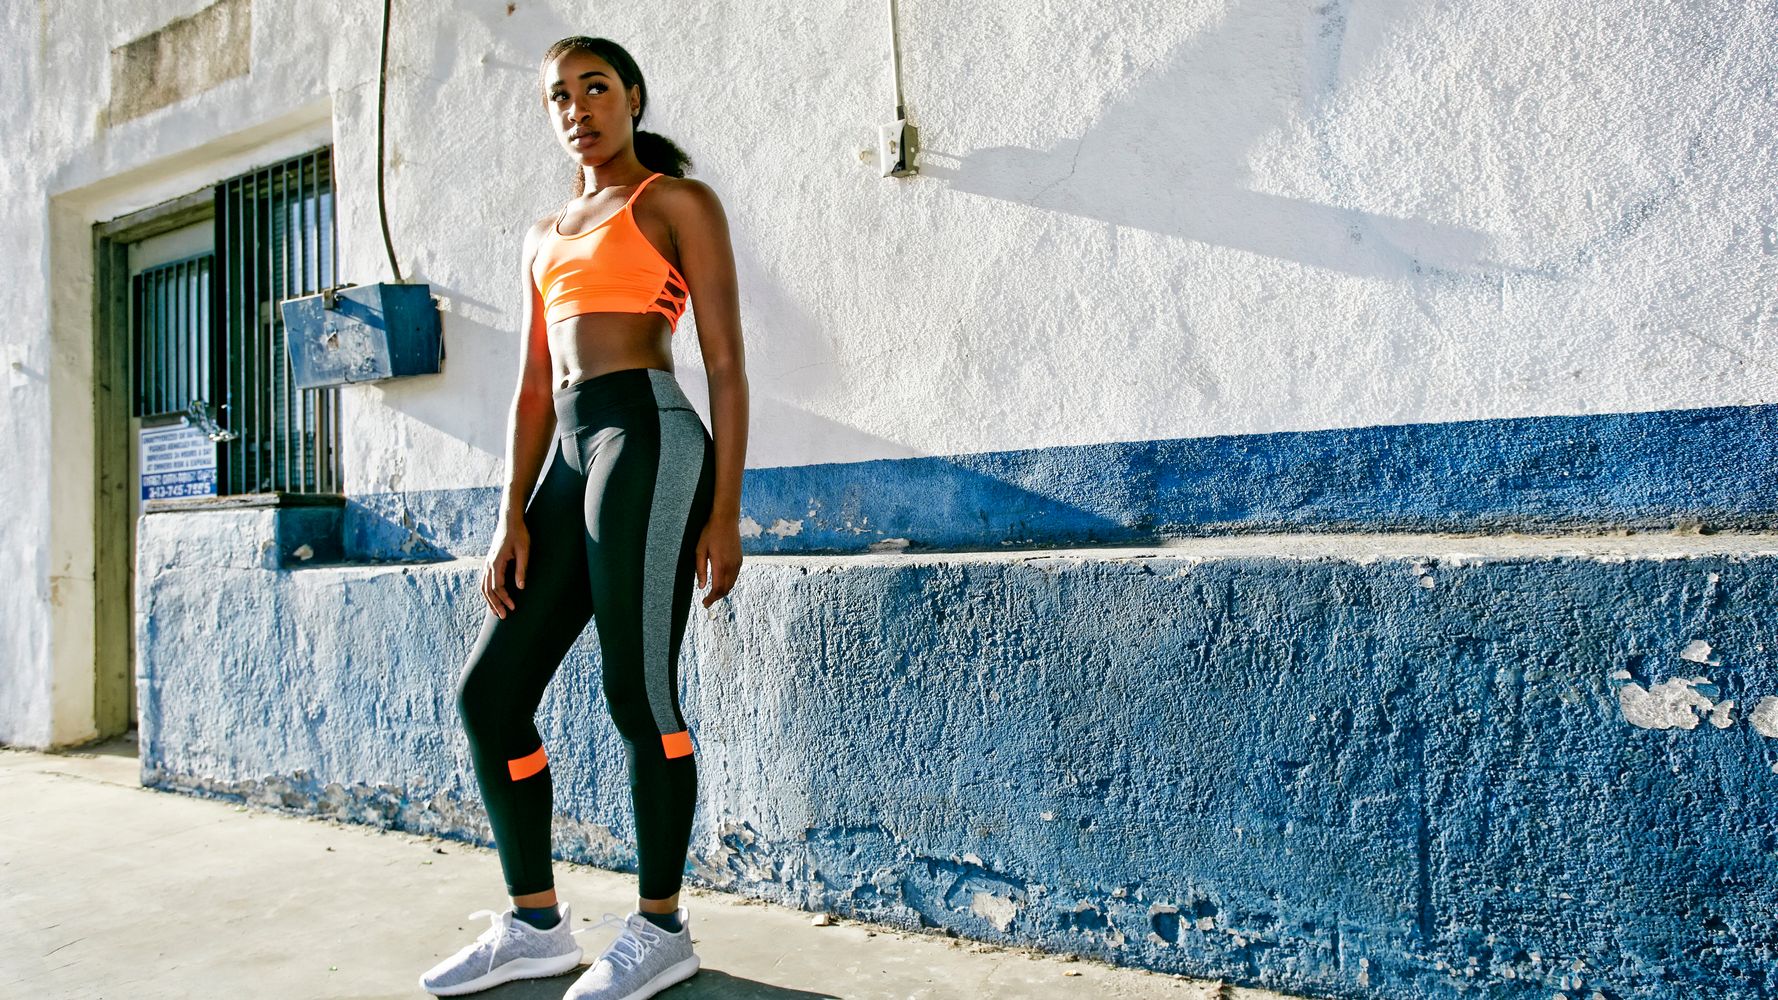 5 Types of Workout Outfits for Tall Women